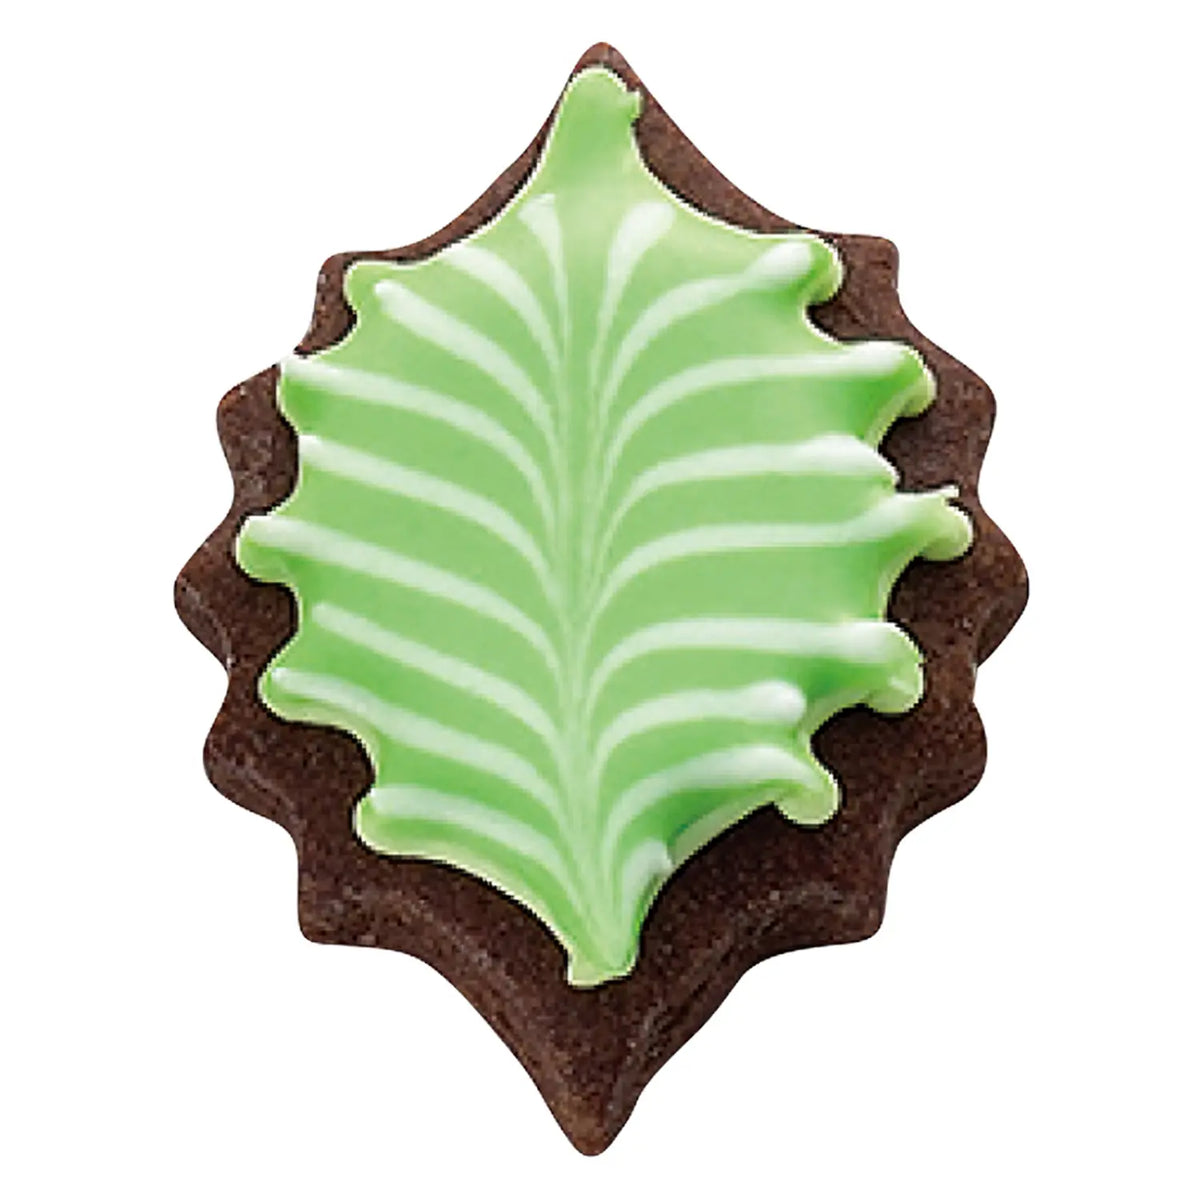 TIGERCROWN Cake Land Stainless Steel Cookie Cutter Holly Leaf